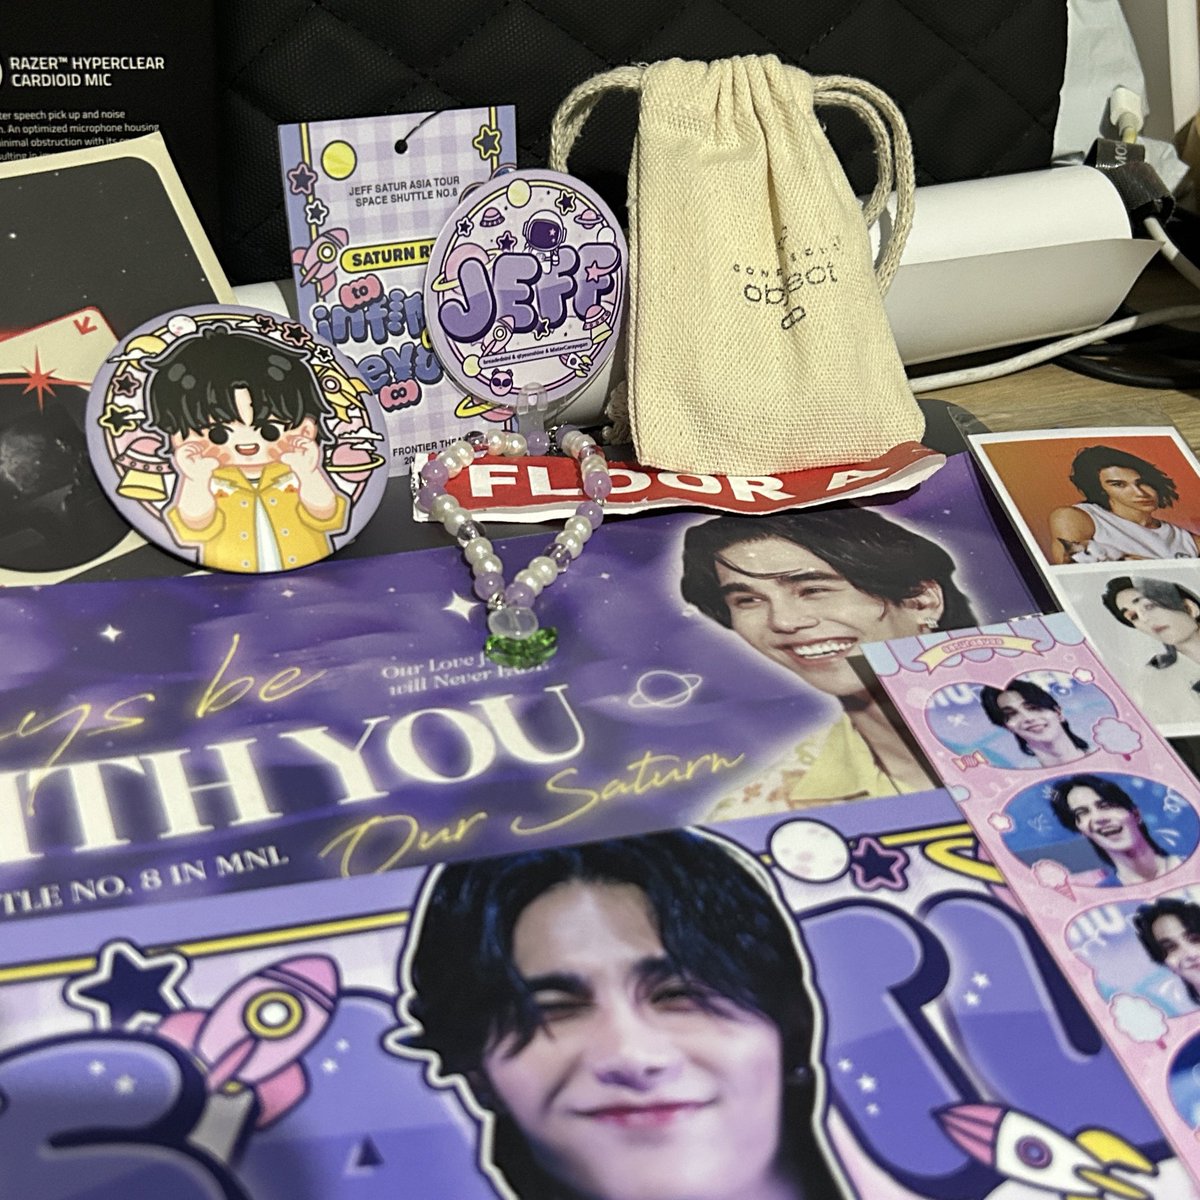 i didn't take much merch home, but these gifts made with so much love always make me happy 🥰🥰🥰 thank you to @jeffsaturph_ @SATURNRETURN__ and @roxieshielina 💜 #JeffSaturInManila #JeffSaturSpaceShuttleNo8